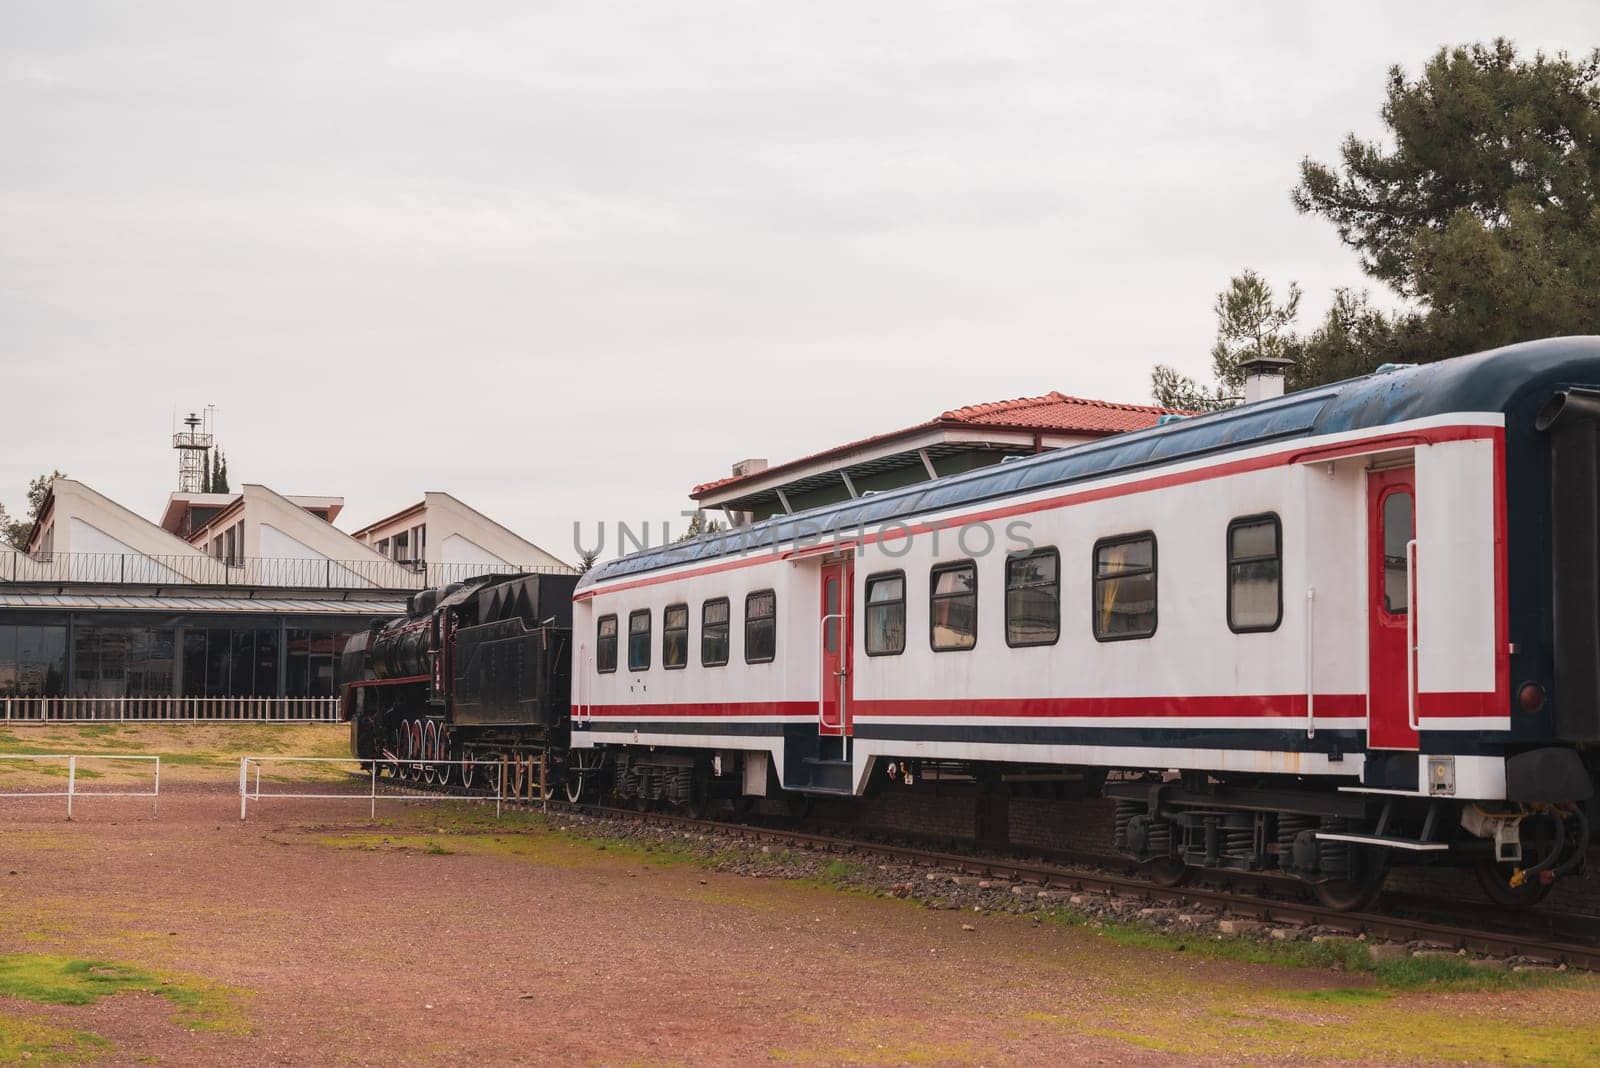 Vintage passenger train waiting for passengers at the train station by Sonat